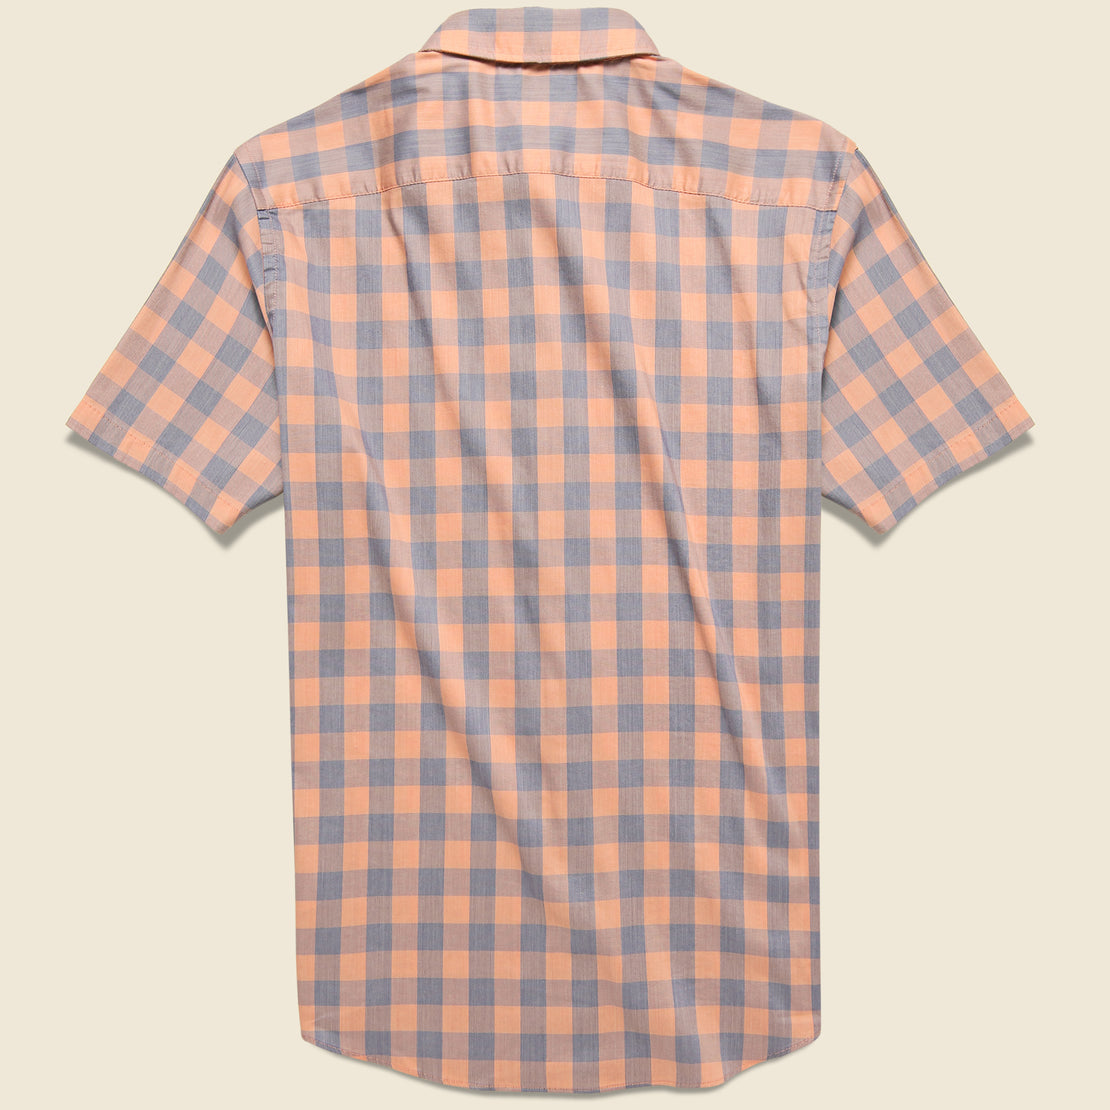 Movement Shirt - Coral Dusk Check - Faherty - STAG Provisions - Tops - S/S Woven - Plaid